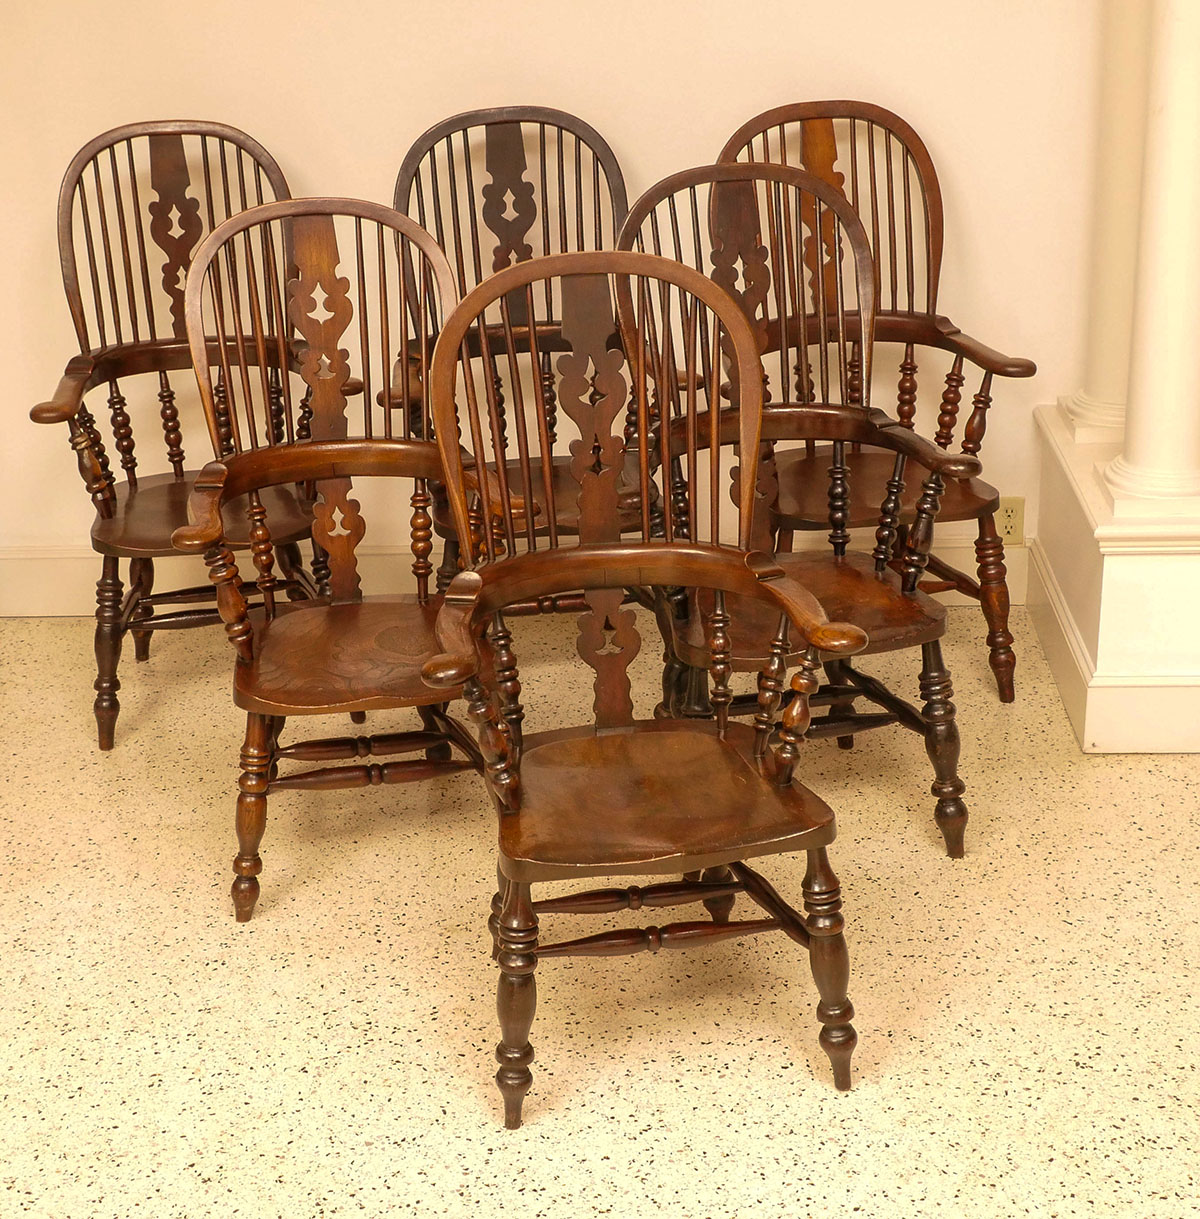 6 BOW BACK DINING CHAIRS: 6 large and